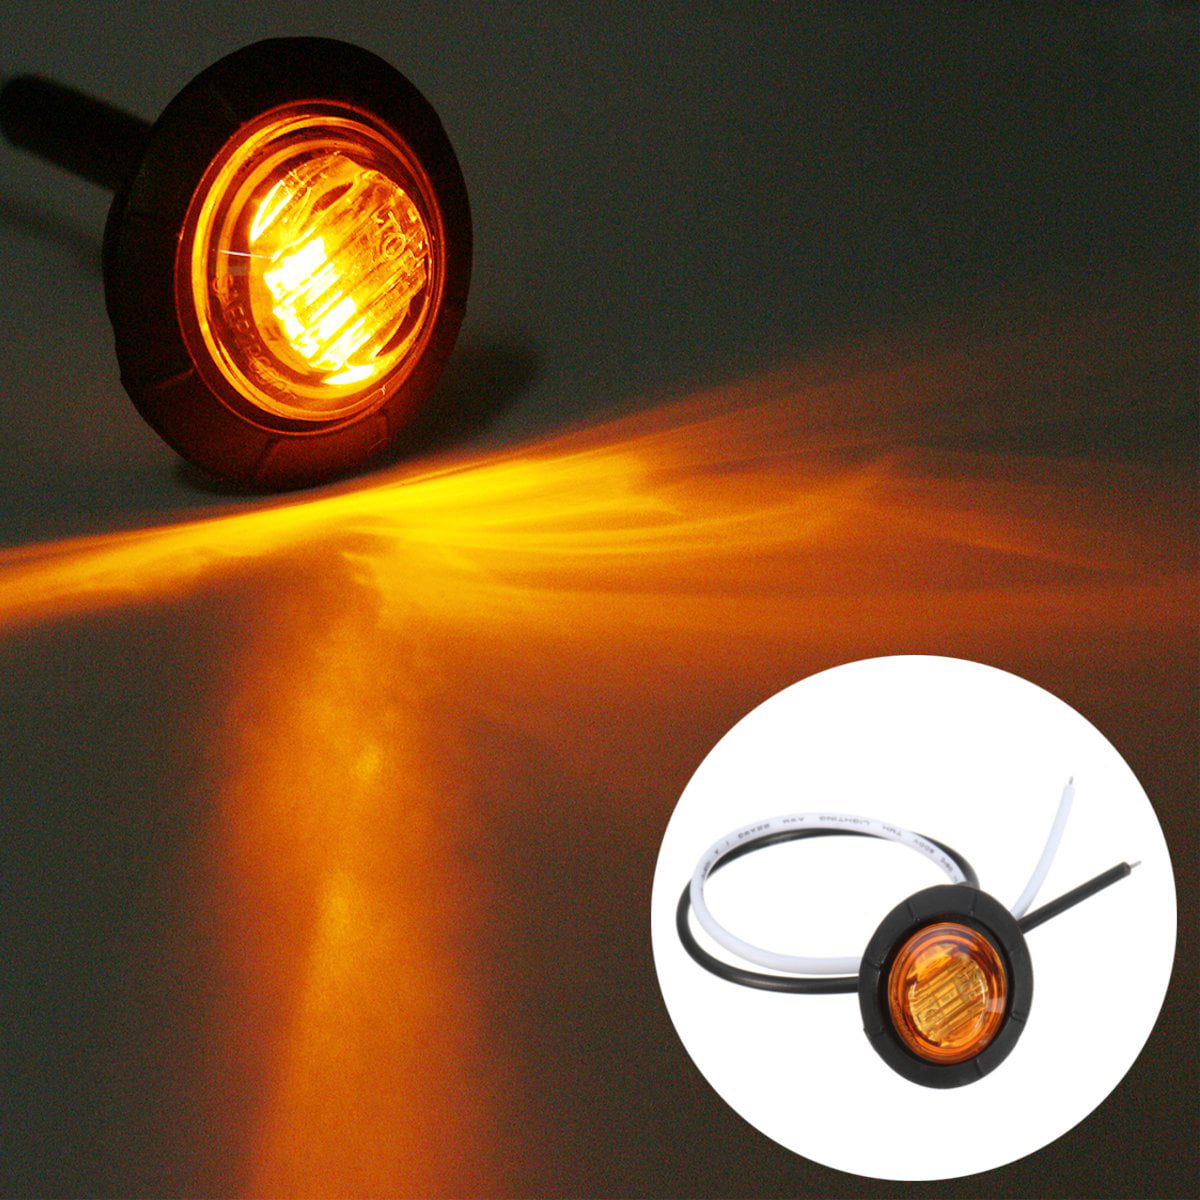 3/4 inch Round Amber LED Clearance Single Button Lamps Sealed Side Marker Indicators Lights with Plug Interface Trailer ATV SUV Truck Van RV Boat Universal 12V DC Waterproof XT-DC Pack of 5 Meerkatt 